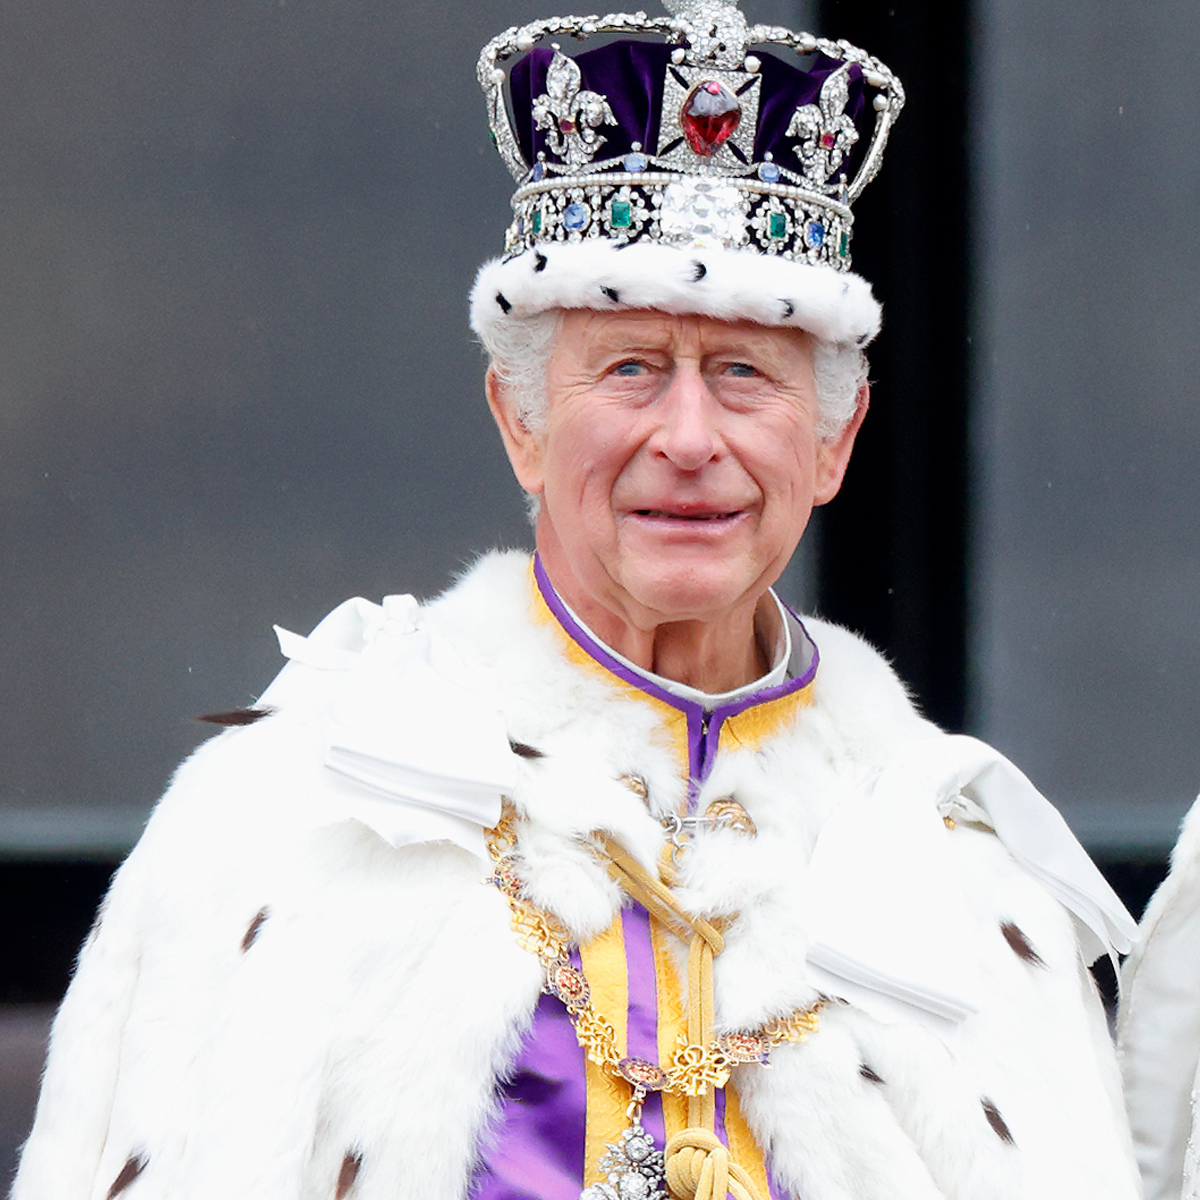 King Charles III News, Pictures, and Videos - E! Online